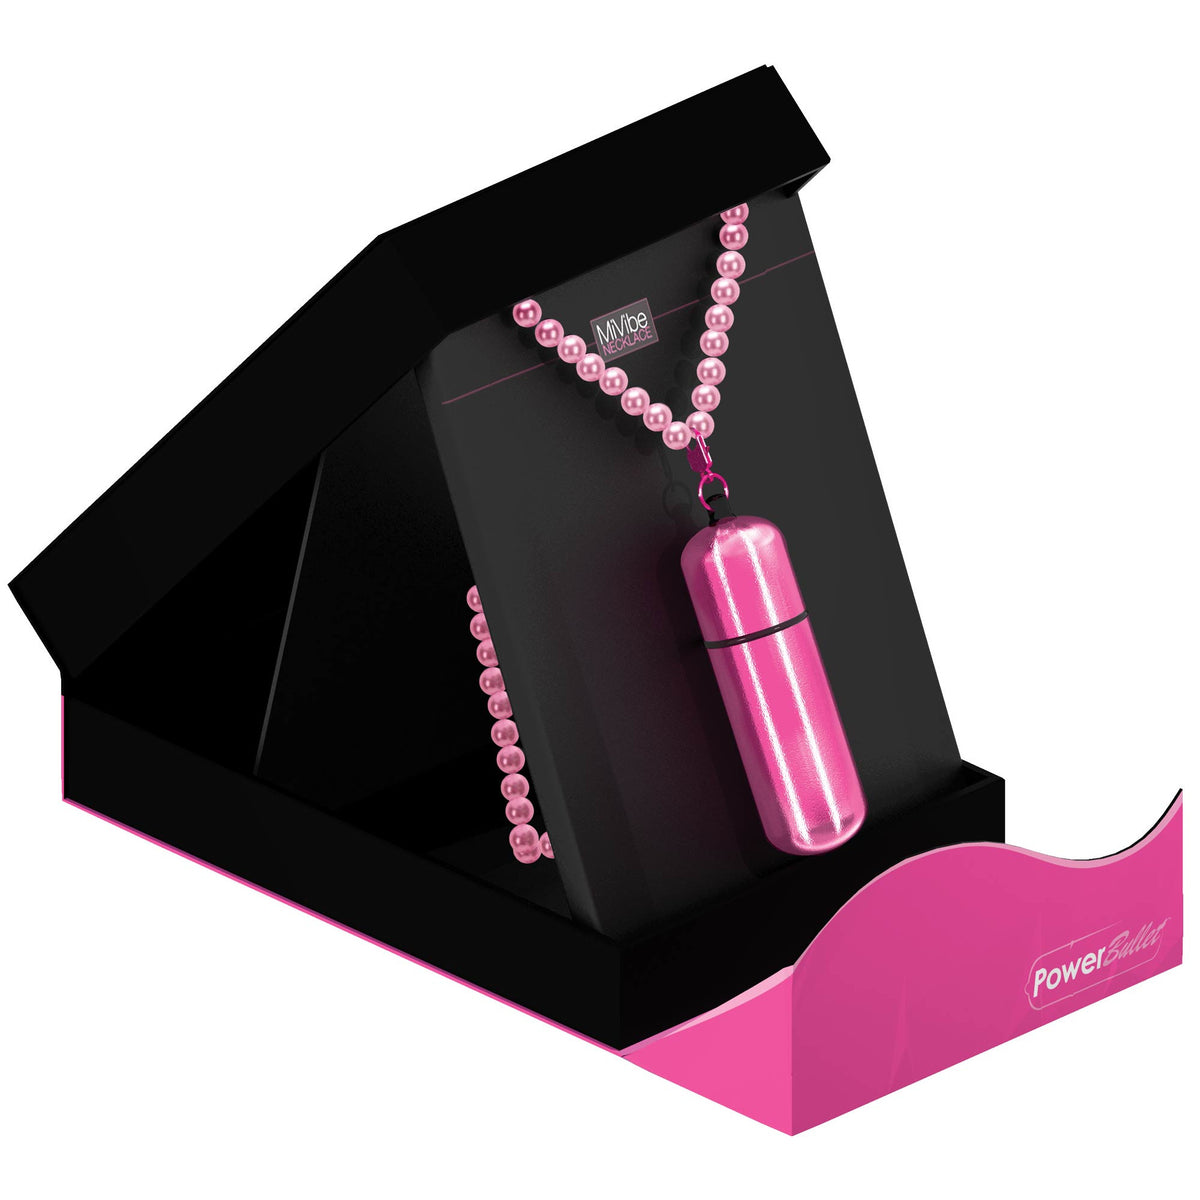 PowerBullet MiVibe Bullet Vibrator Necklace - Battery Operated - Pink